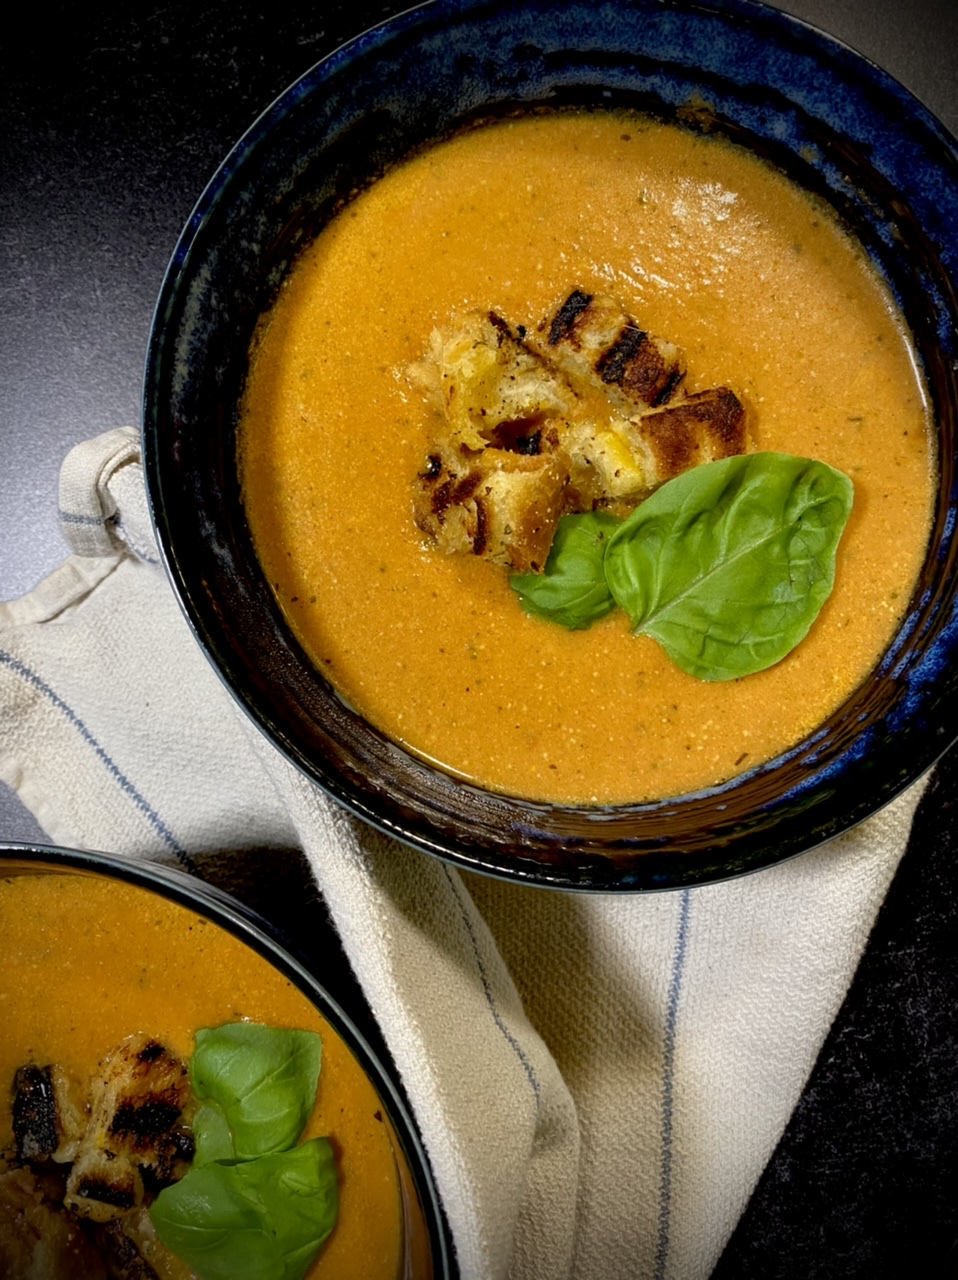 D1839418 5C0F 4F8E 9814 F97595E1EE50 - One Pot Tomato Soup with Grilled Cheese Croutons